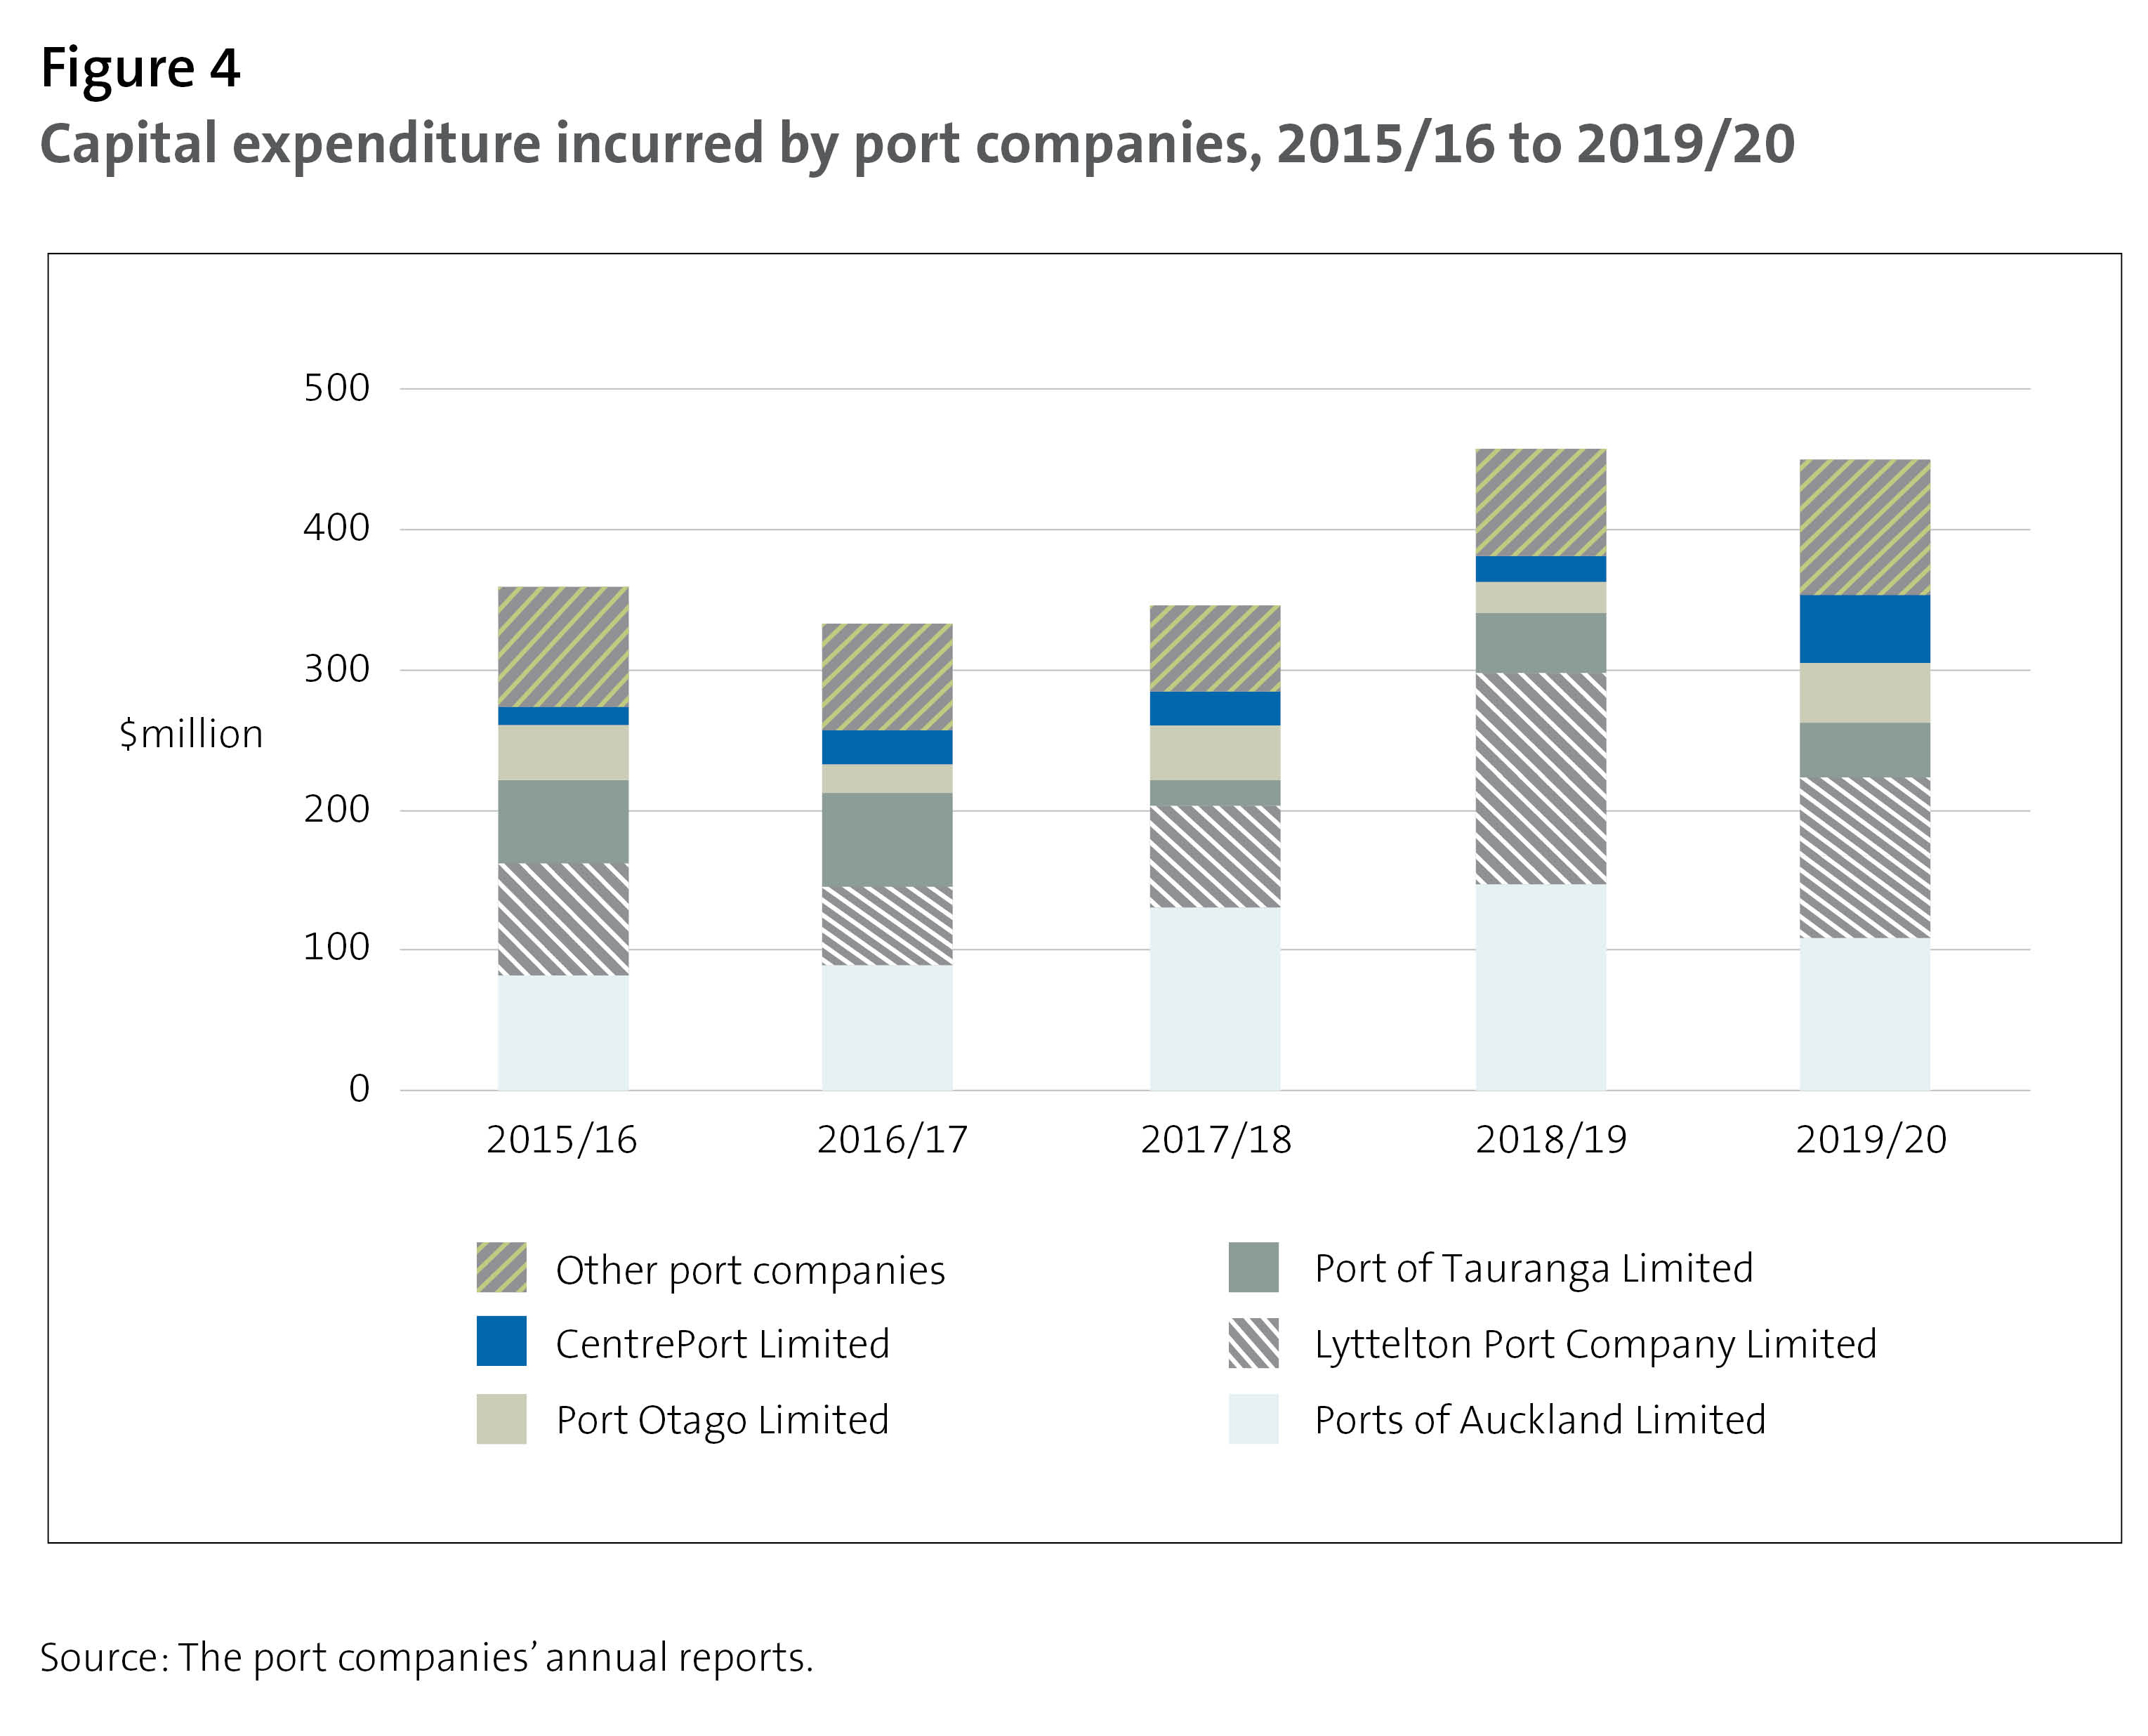 Figure 4 - Capital expenditure incurred by port companies, 2015/16 to 2019/20